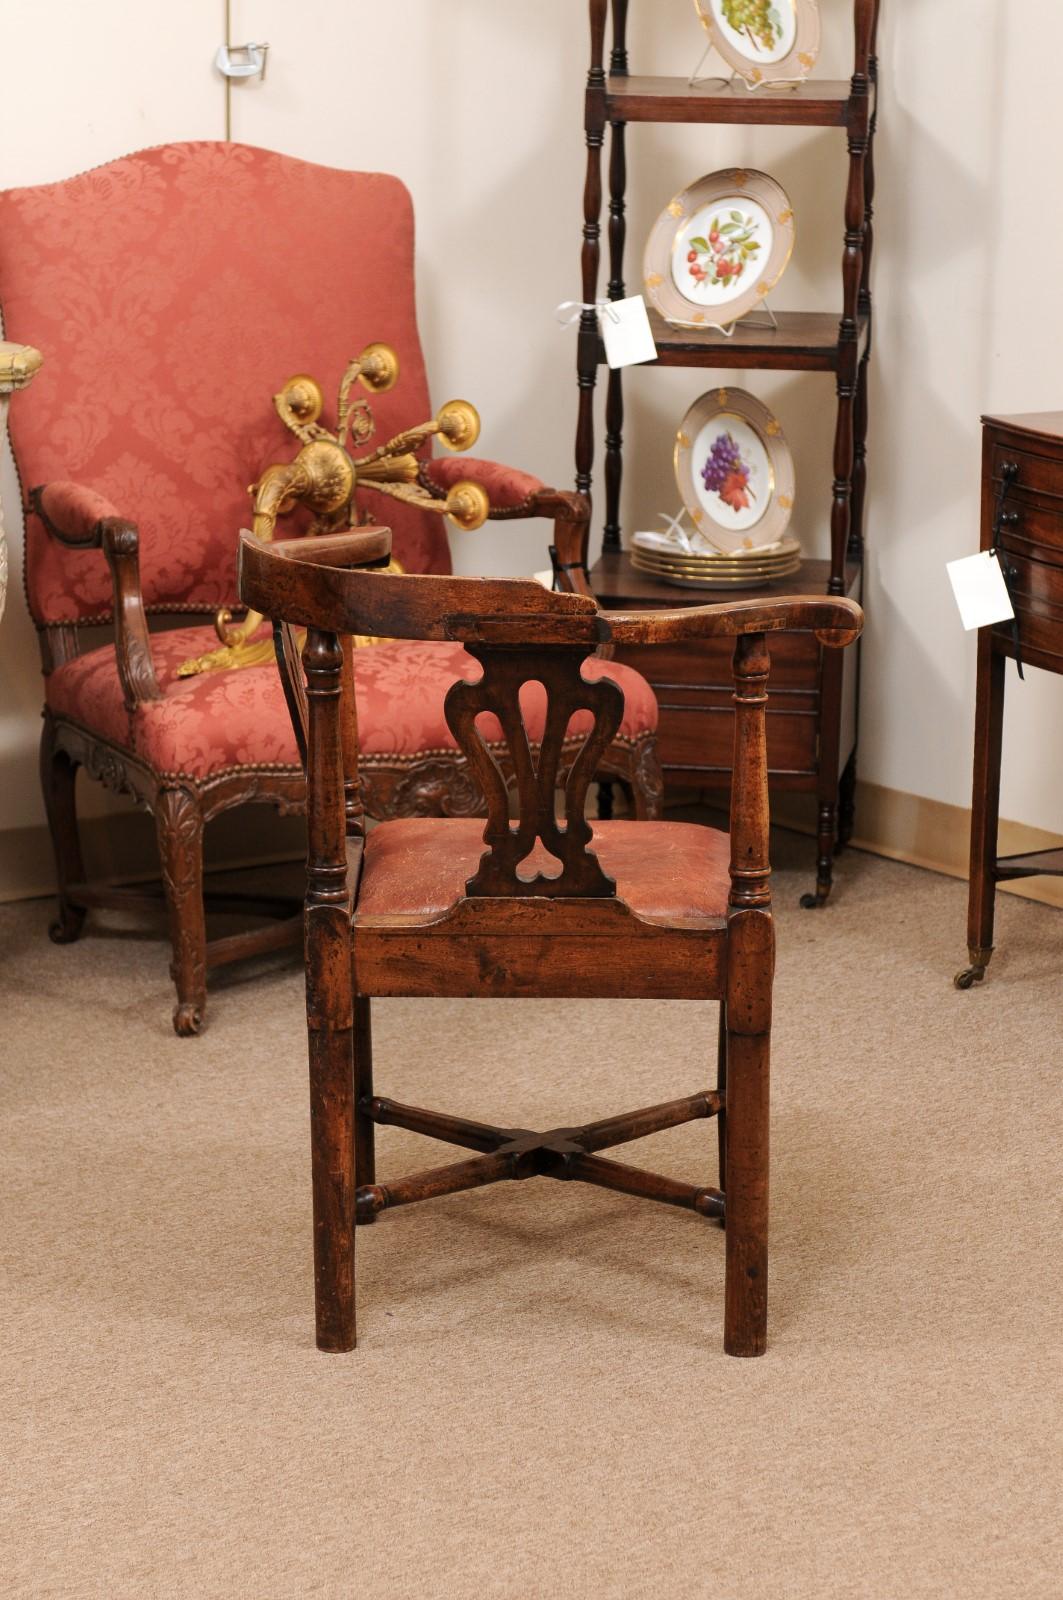 18th Century English Corner Chair in Mahogany with X-Stretcher & Leather Upholstered Seat
